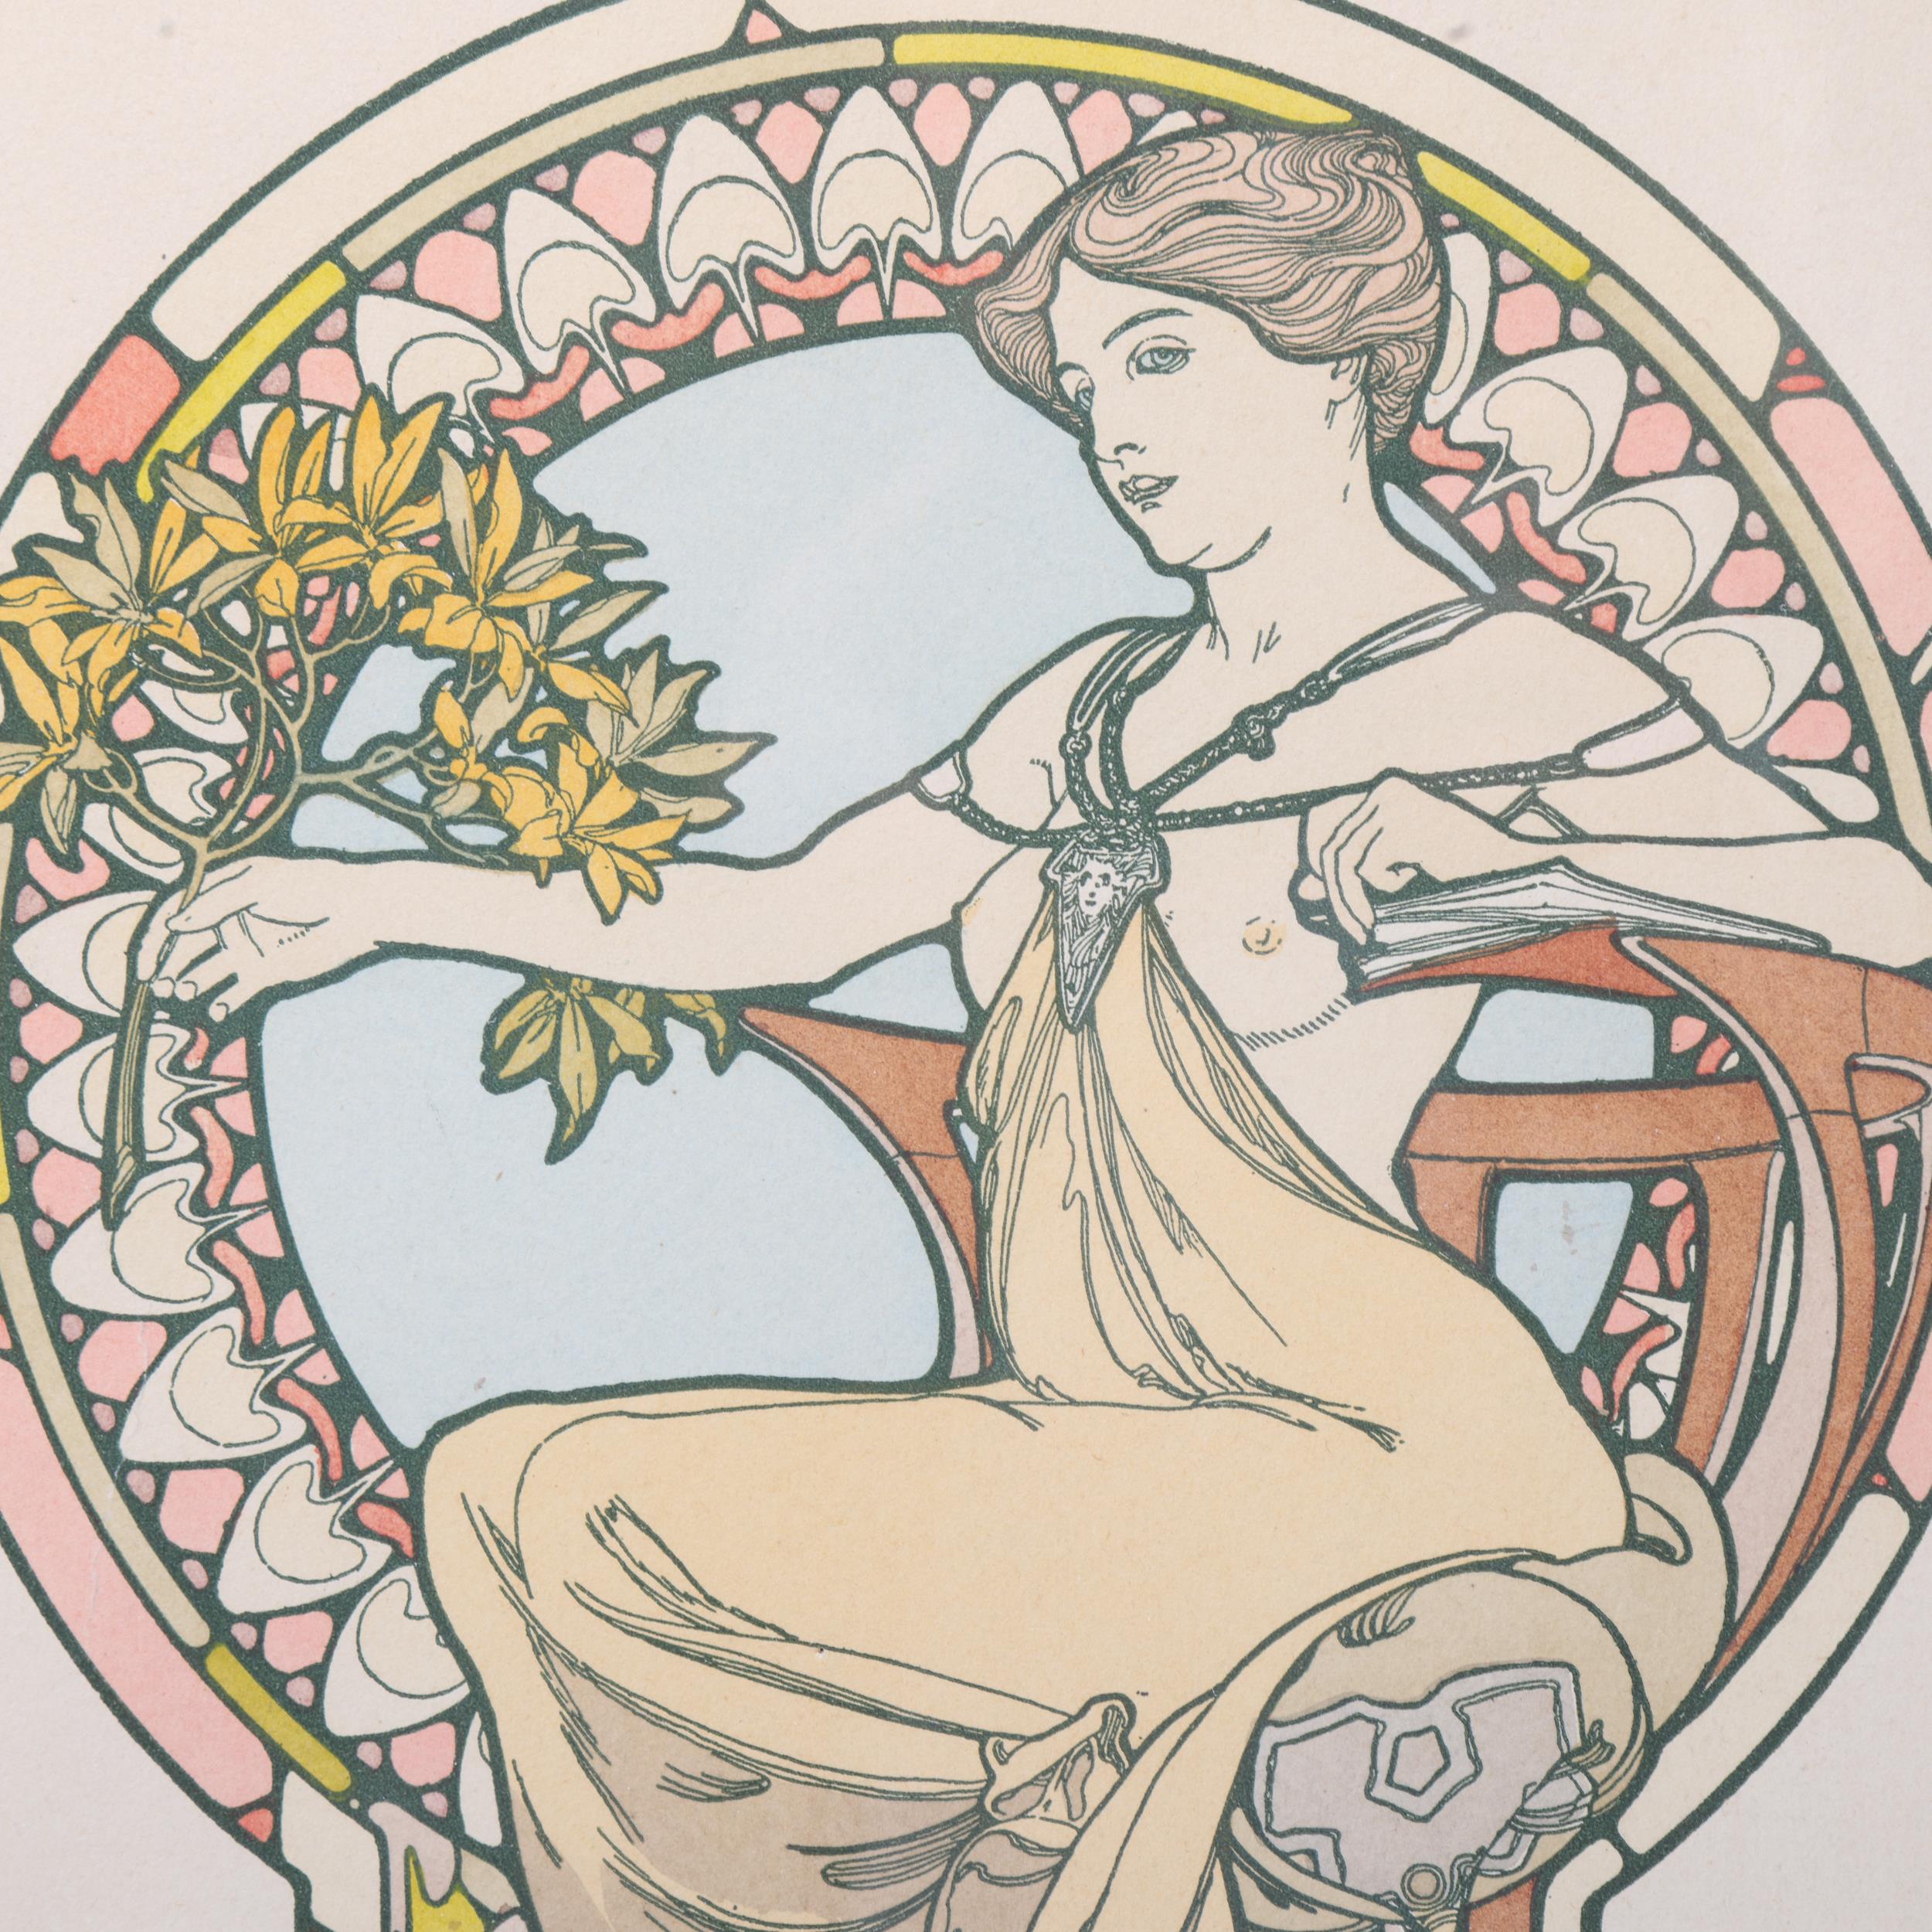 French Art Nouveau lithograph advertising print circa 1902, by Mucha, image 37cm x 23cm, overall - Image 3 of 3